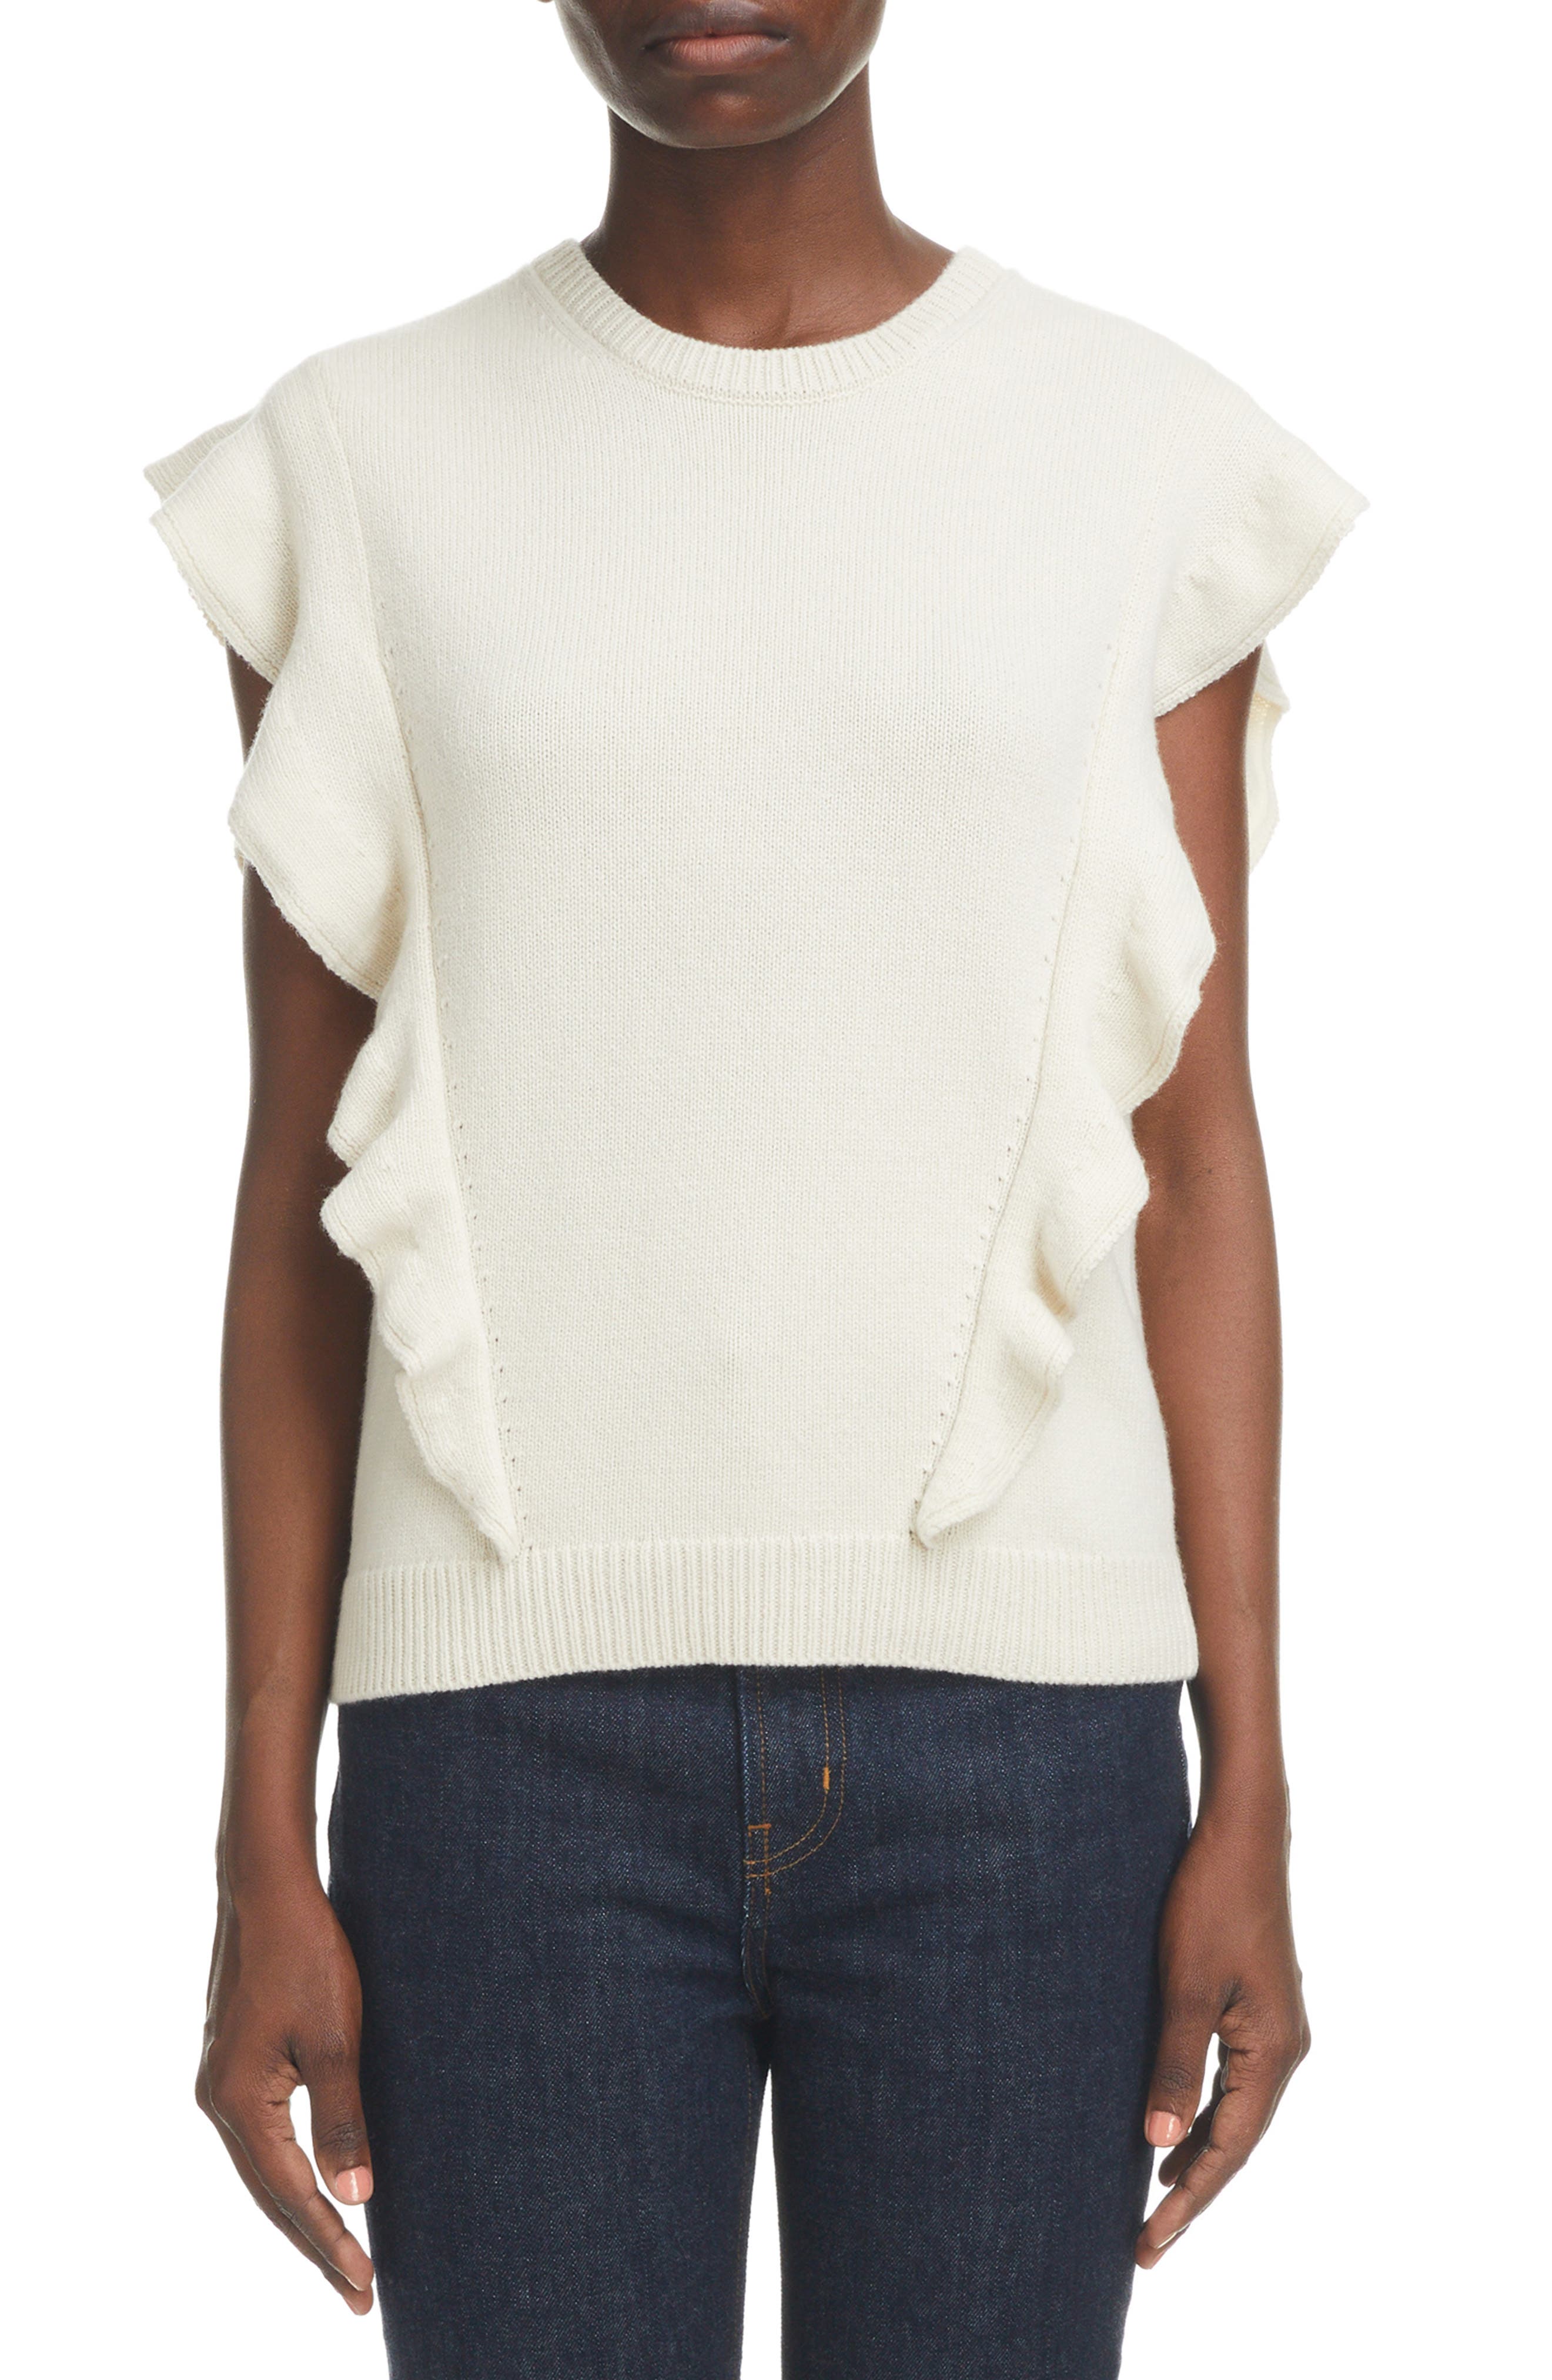 Chloe Ruffle Cashmere Sweater in White Powder at Nordstrom